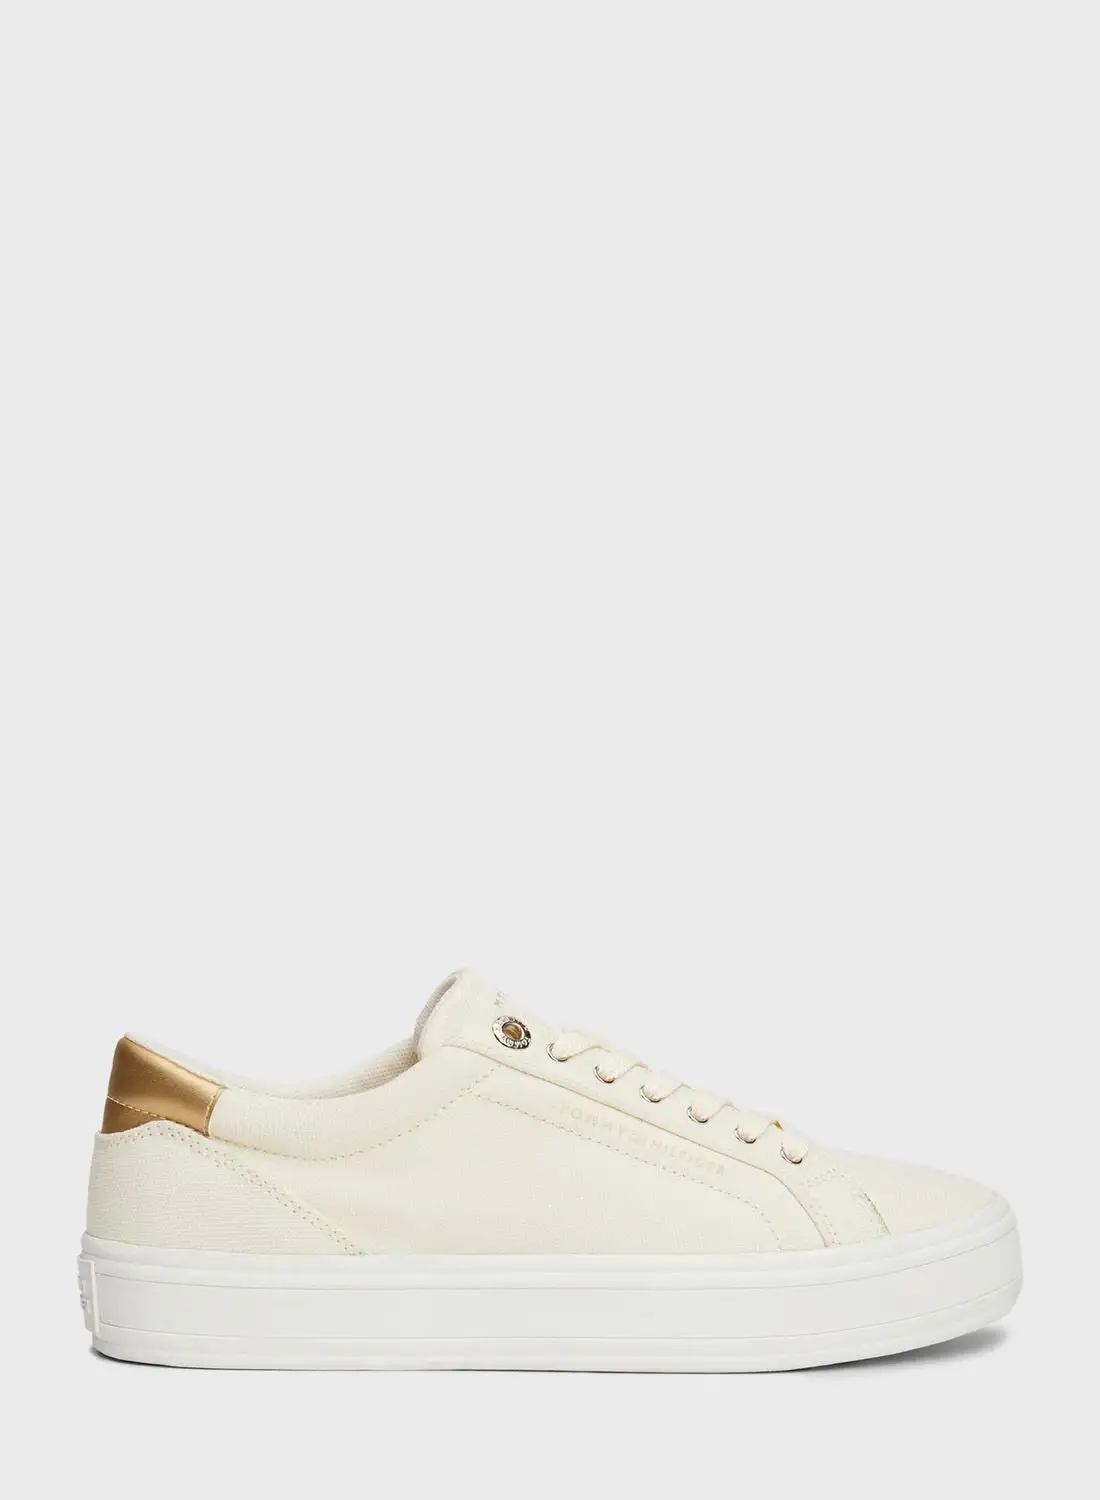 TOMMY HILFIGER Essential Vulc Canvas Low Top Sneakers